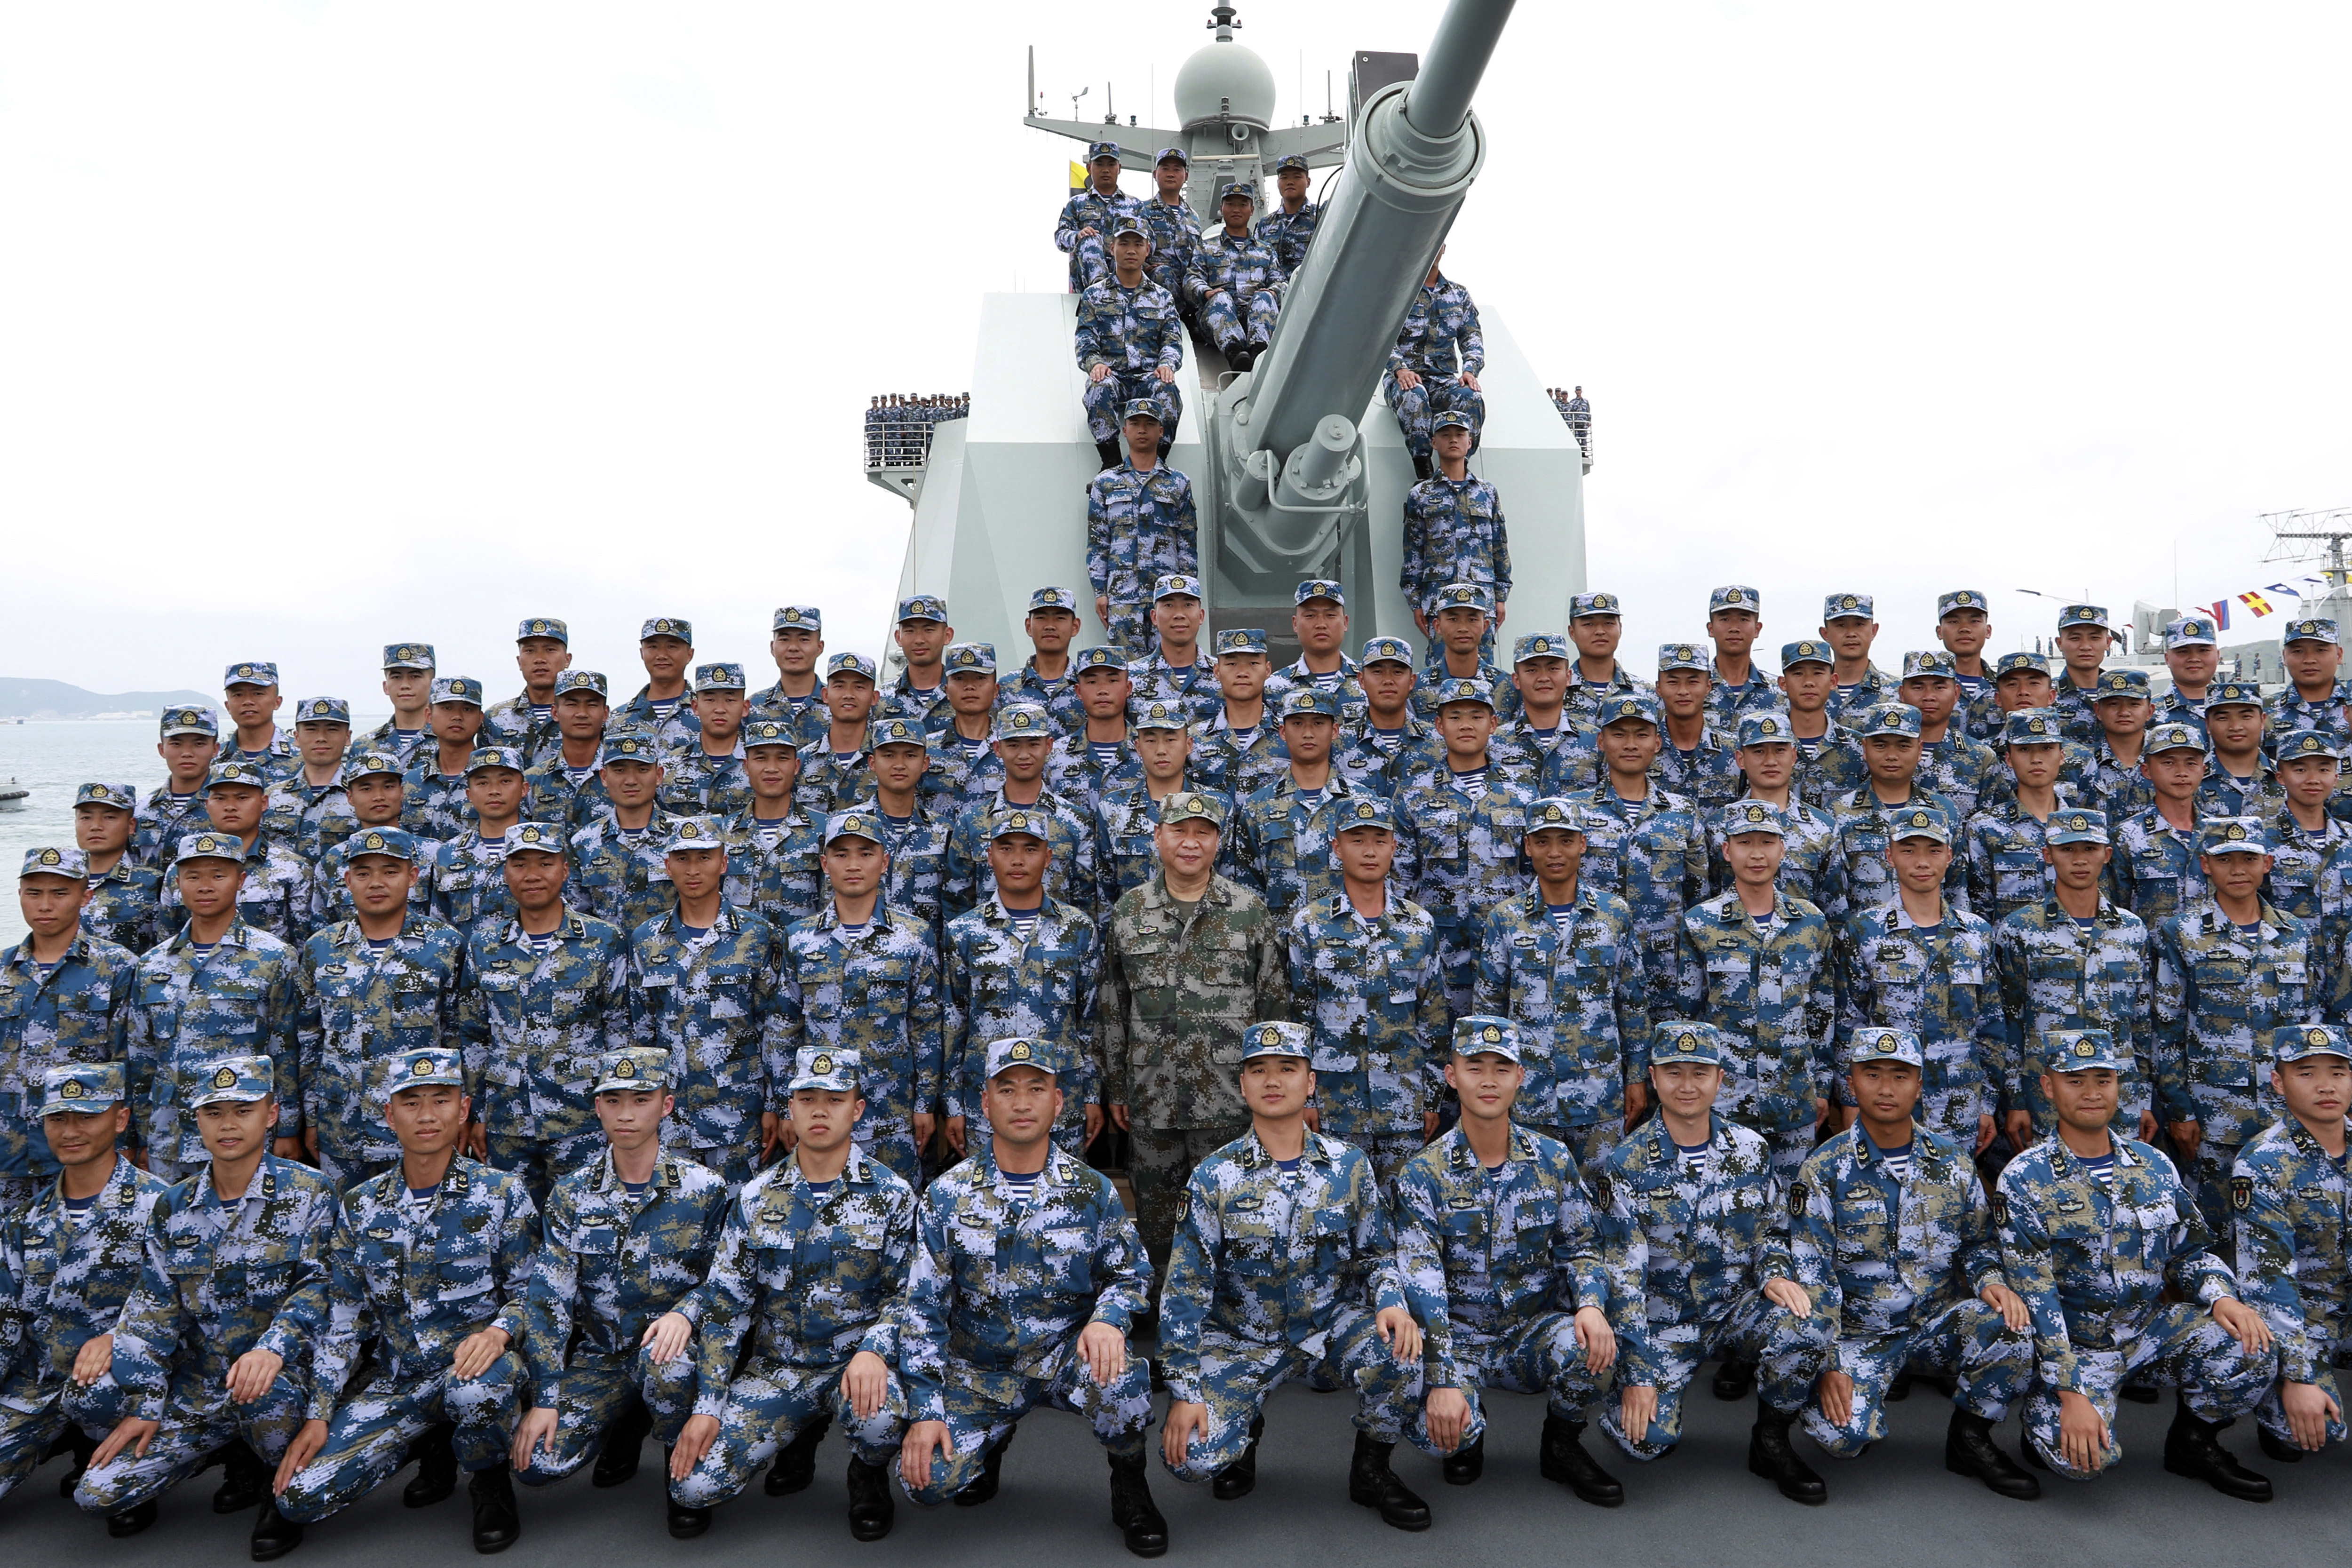 FILE - In this April 12, 2018, file photo released by Xinhua News Agency, Chinese President Xi Jinping, center in green military uniform, poses with soldiers on a navy ship for a photo after he reviewed the Chinese People's Liberation Army (PLA) Navy fleet in the South China Sea. U.S. Defense Secretary Jim Mattis, who has accused China of 